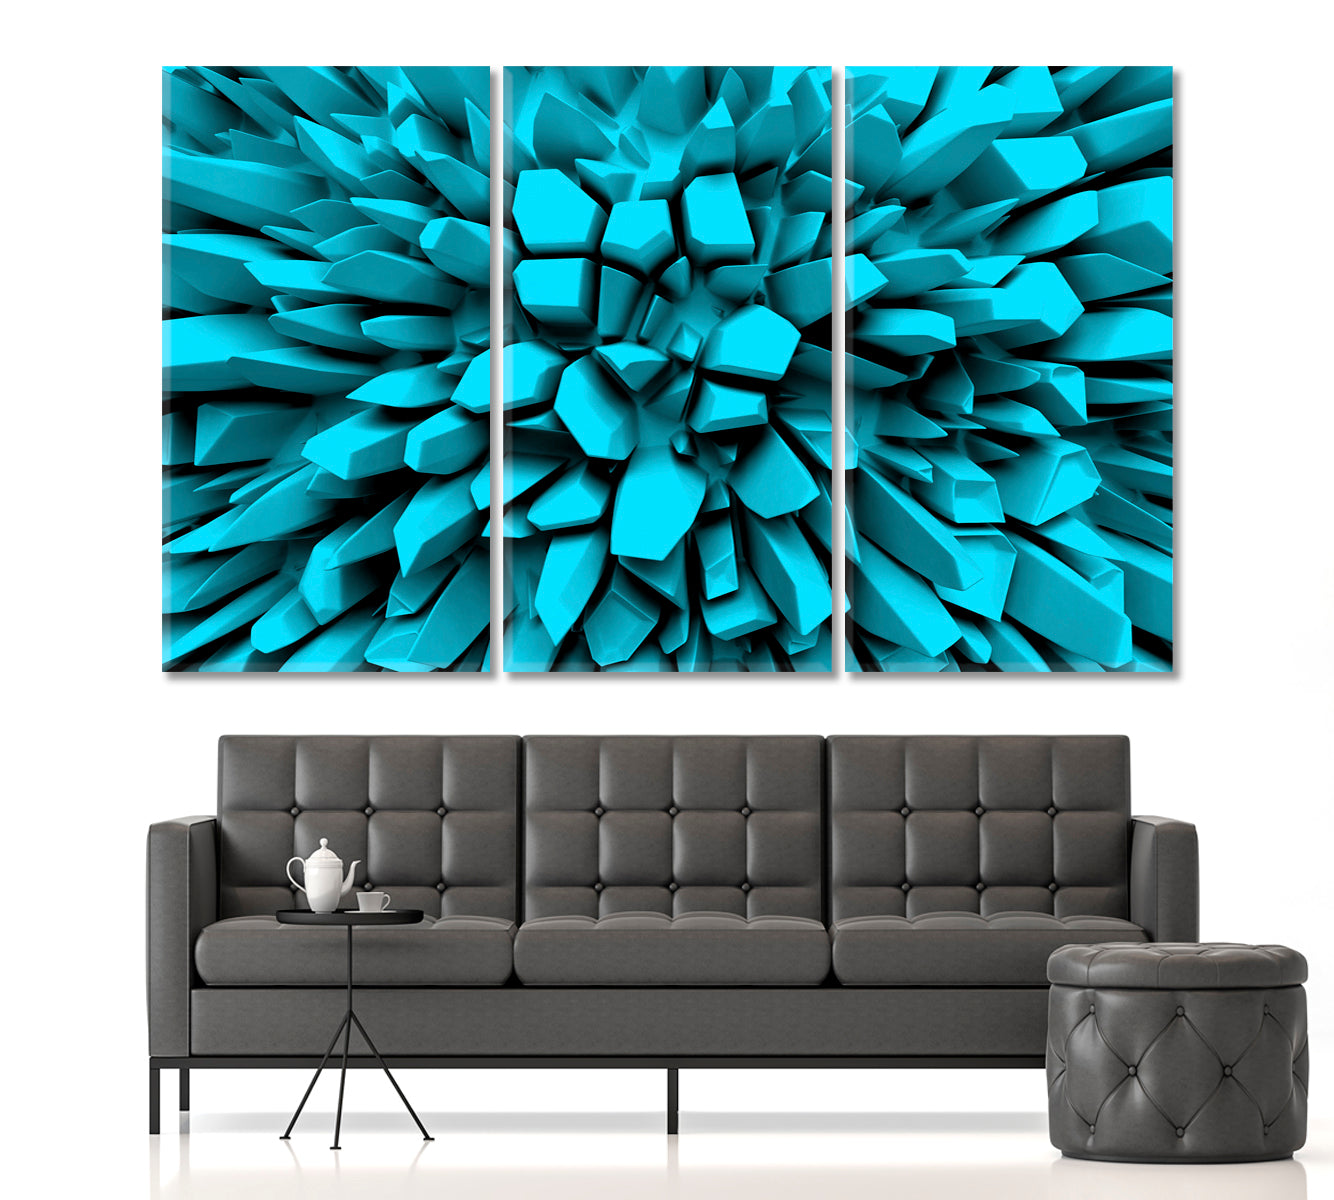 Turquoise Abstract Three-dimension Rays 3D Effect Shapes Poster Abstract Art Print Artesty 3 panels 36" x 24" 